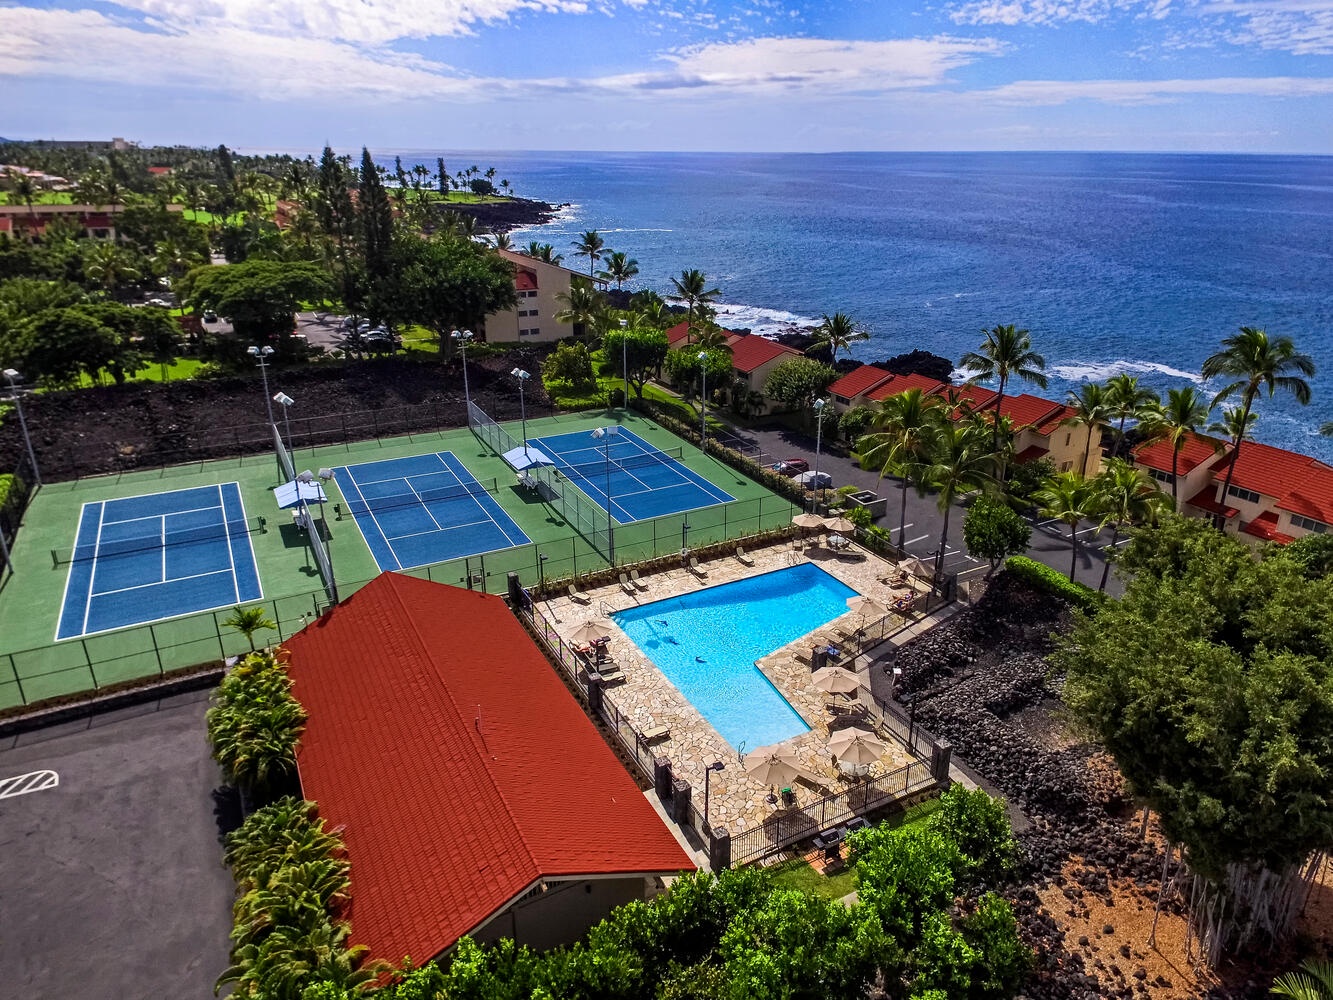 Kailua Kona Vacation Rentals, Keauhou Kona Surf & Racquet 1104 - Enjoy exclusive access to the vibrant condo clubhouse, complete with tennis courts for a friendly match, a ping pong table for indoor fun, and a sparkling pool for a refreshing swim.